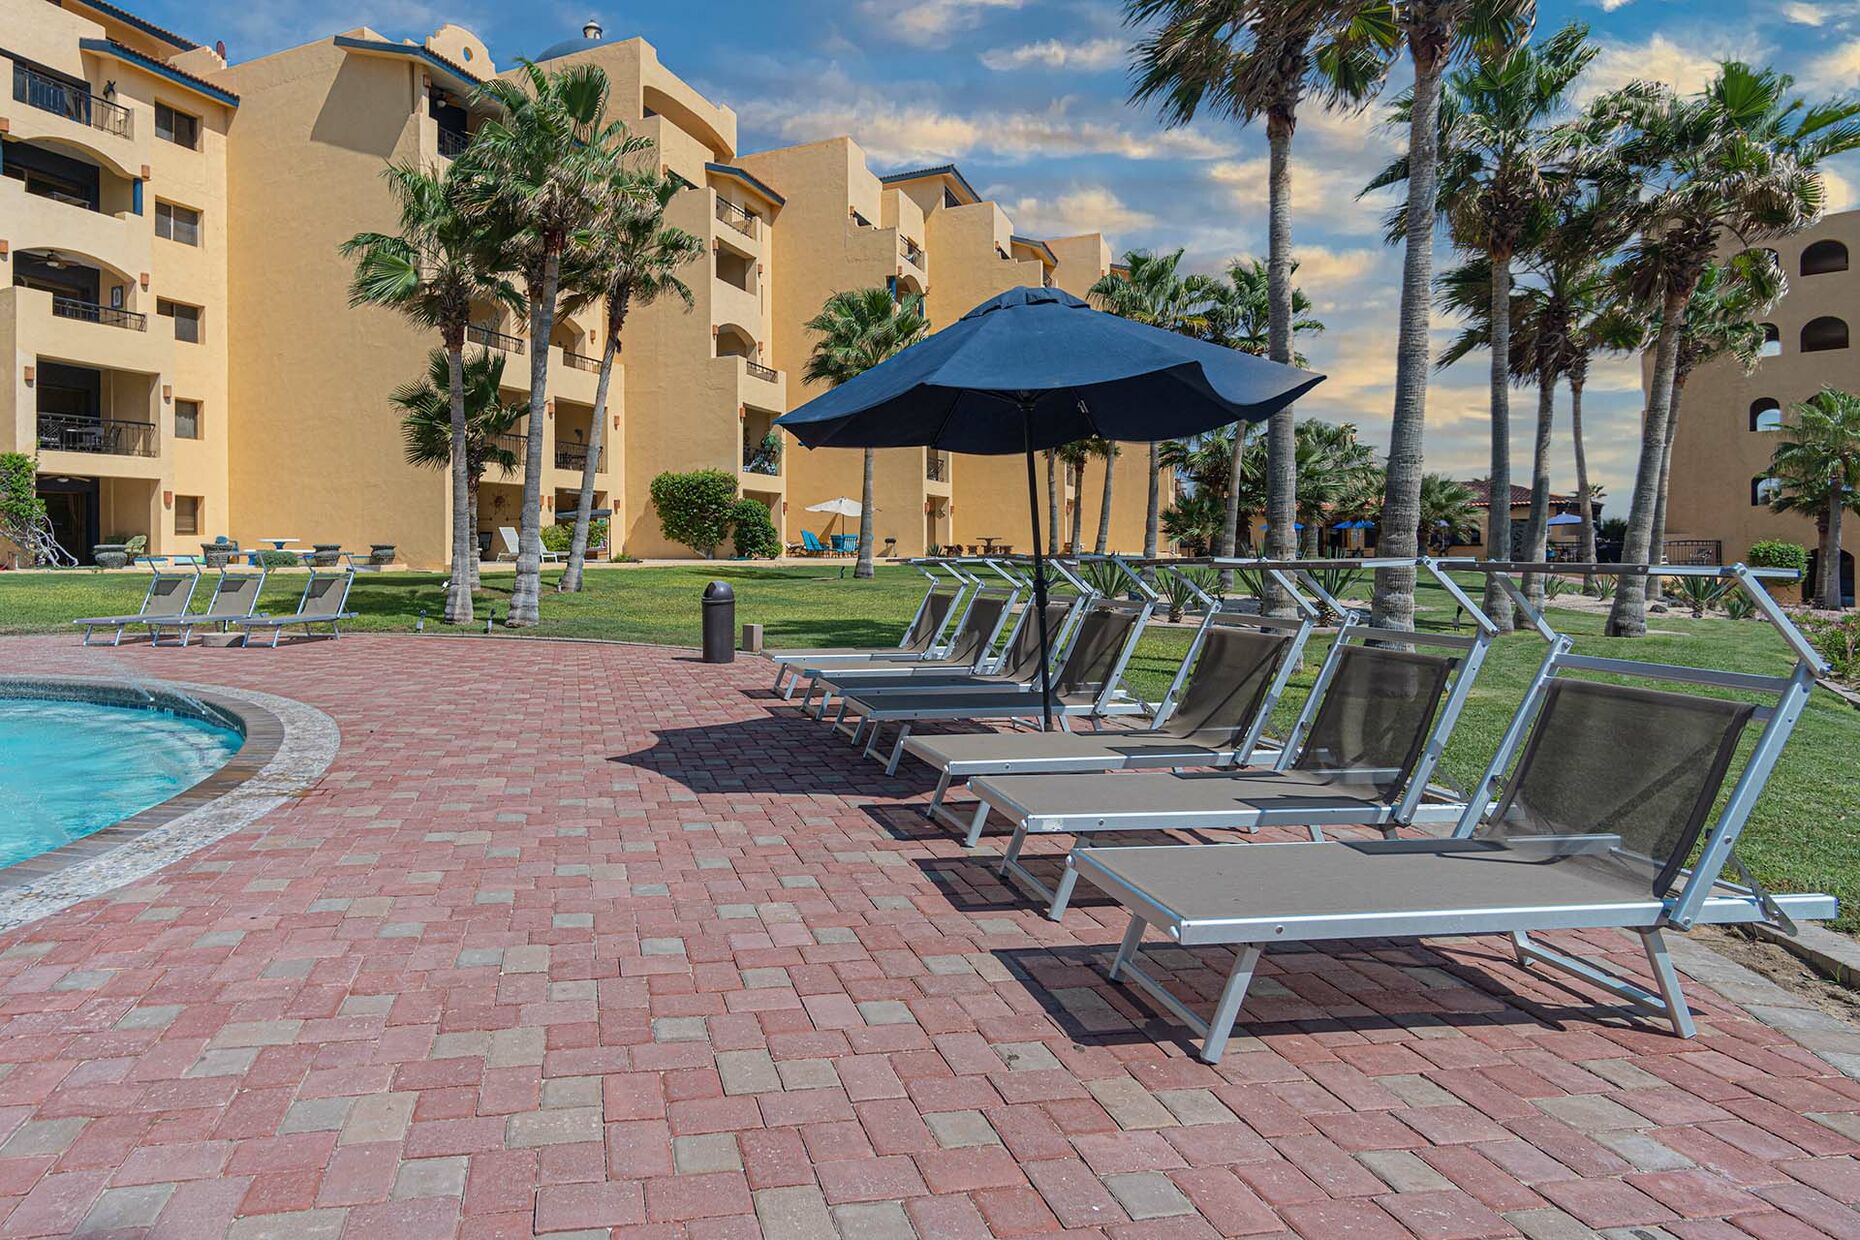 Chaise lounges by the pool outside of the unit.